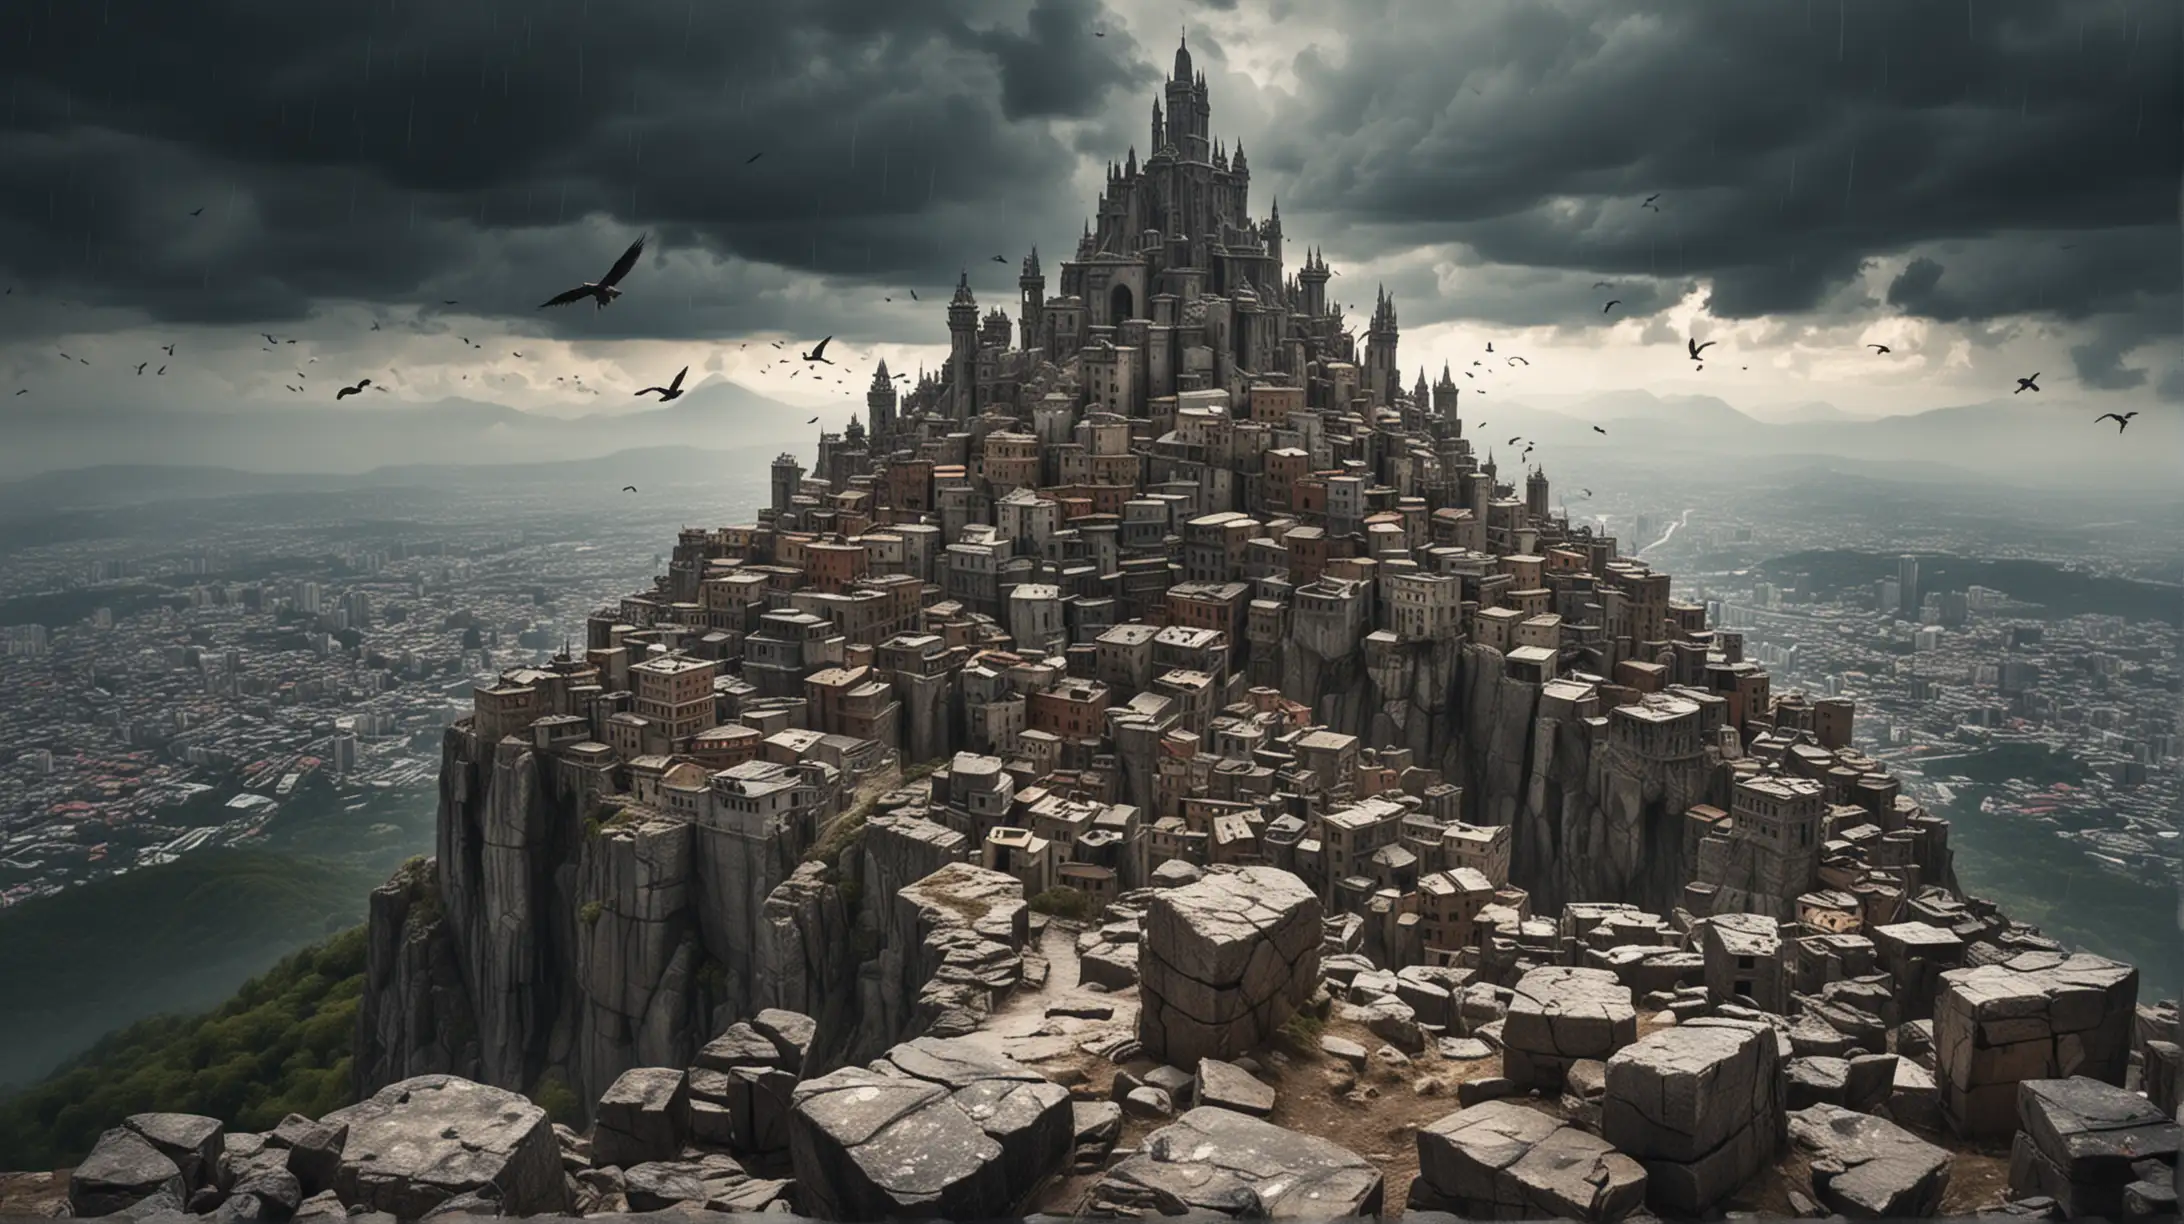 monstrous city made of stone on the top of high mount, wind, rain, cloudy, bird's eye view